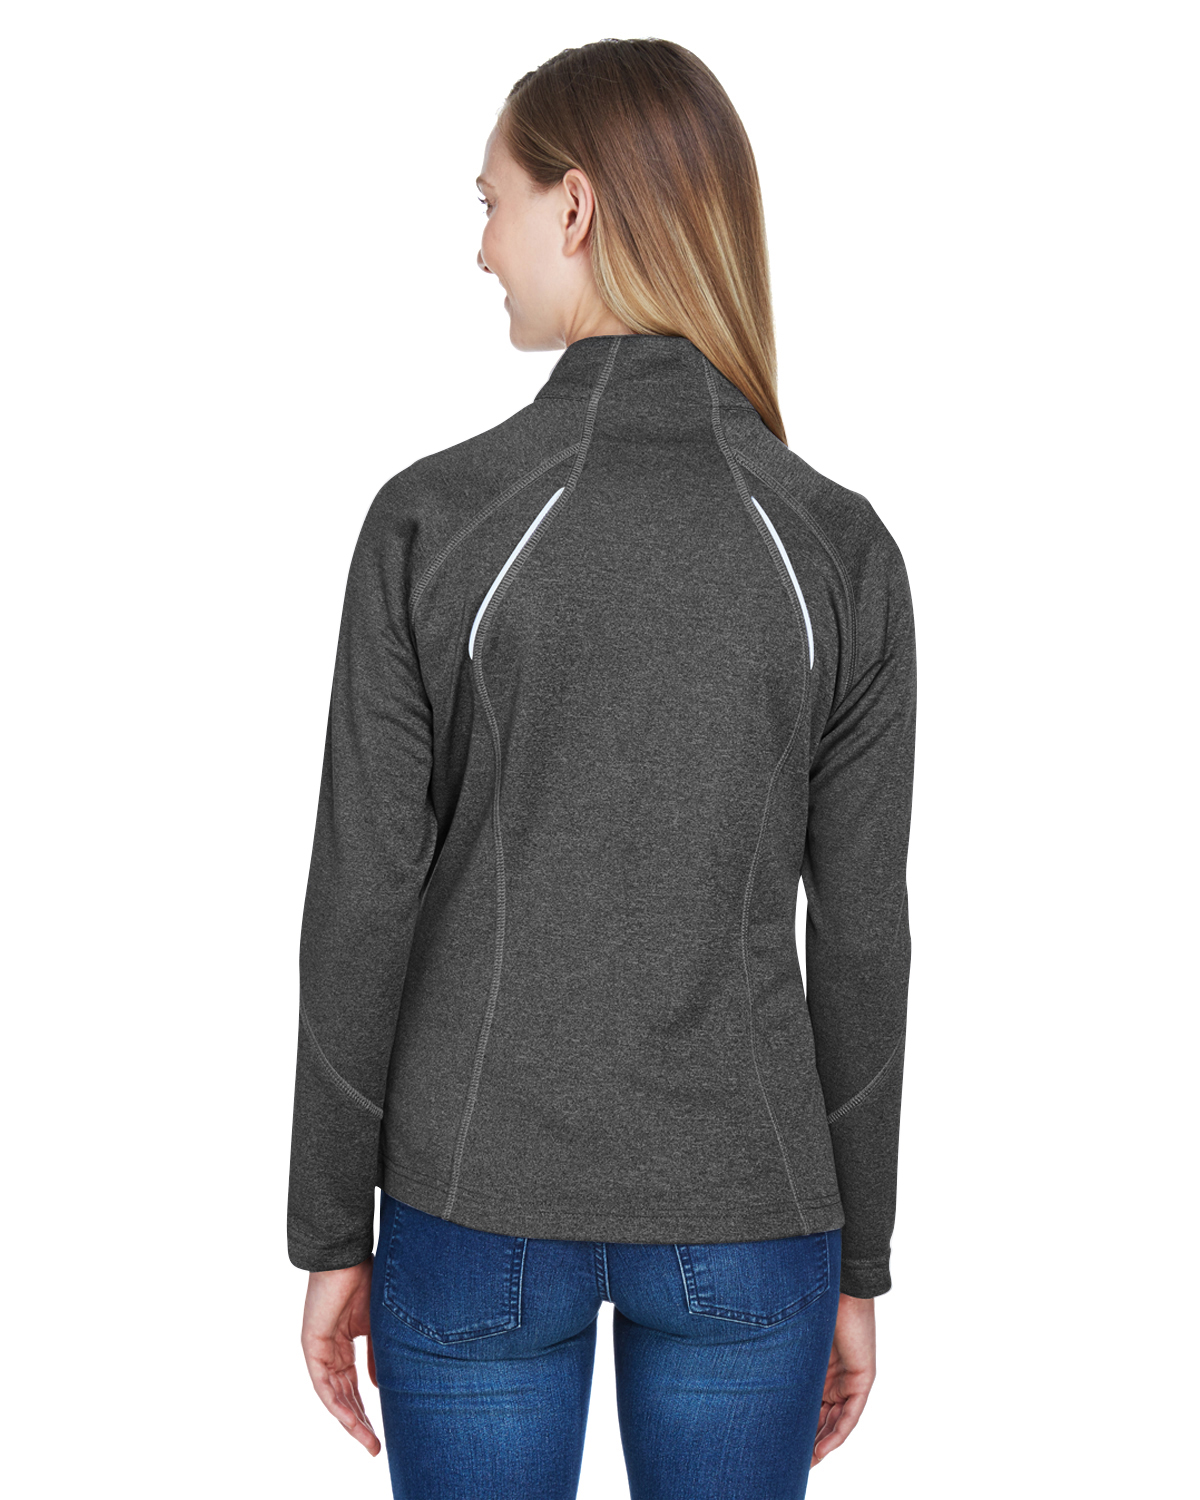 The Ash City - North End Ladies' Gravity Performance Fleece Jacket - CARBN HEATH 452 - XS - image 2 of 2